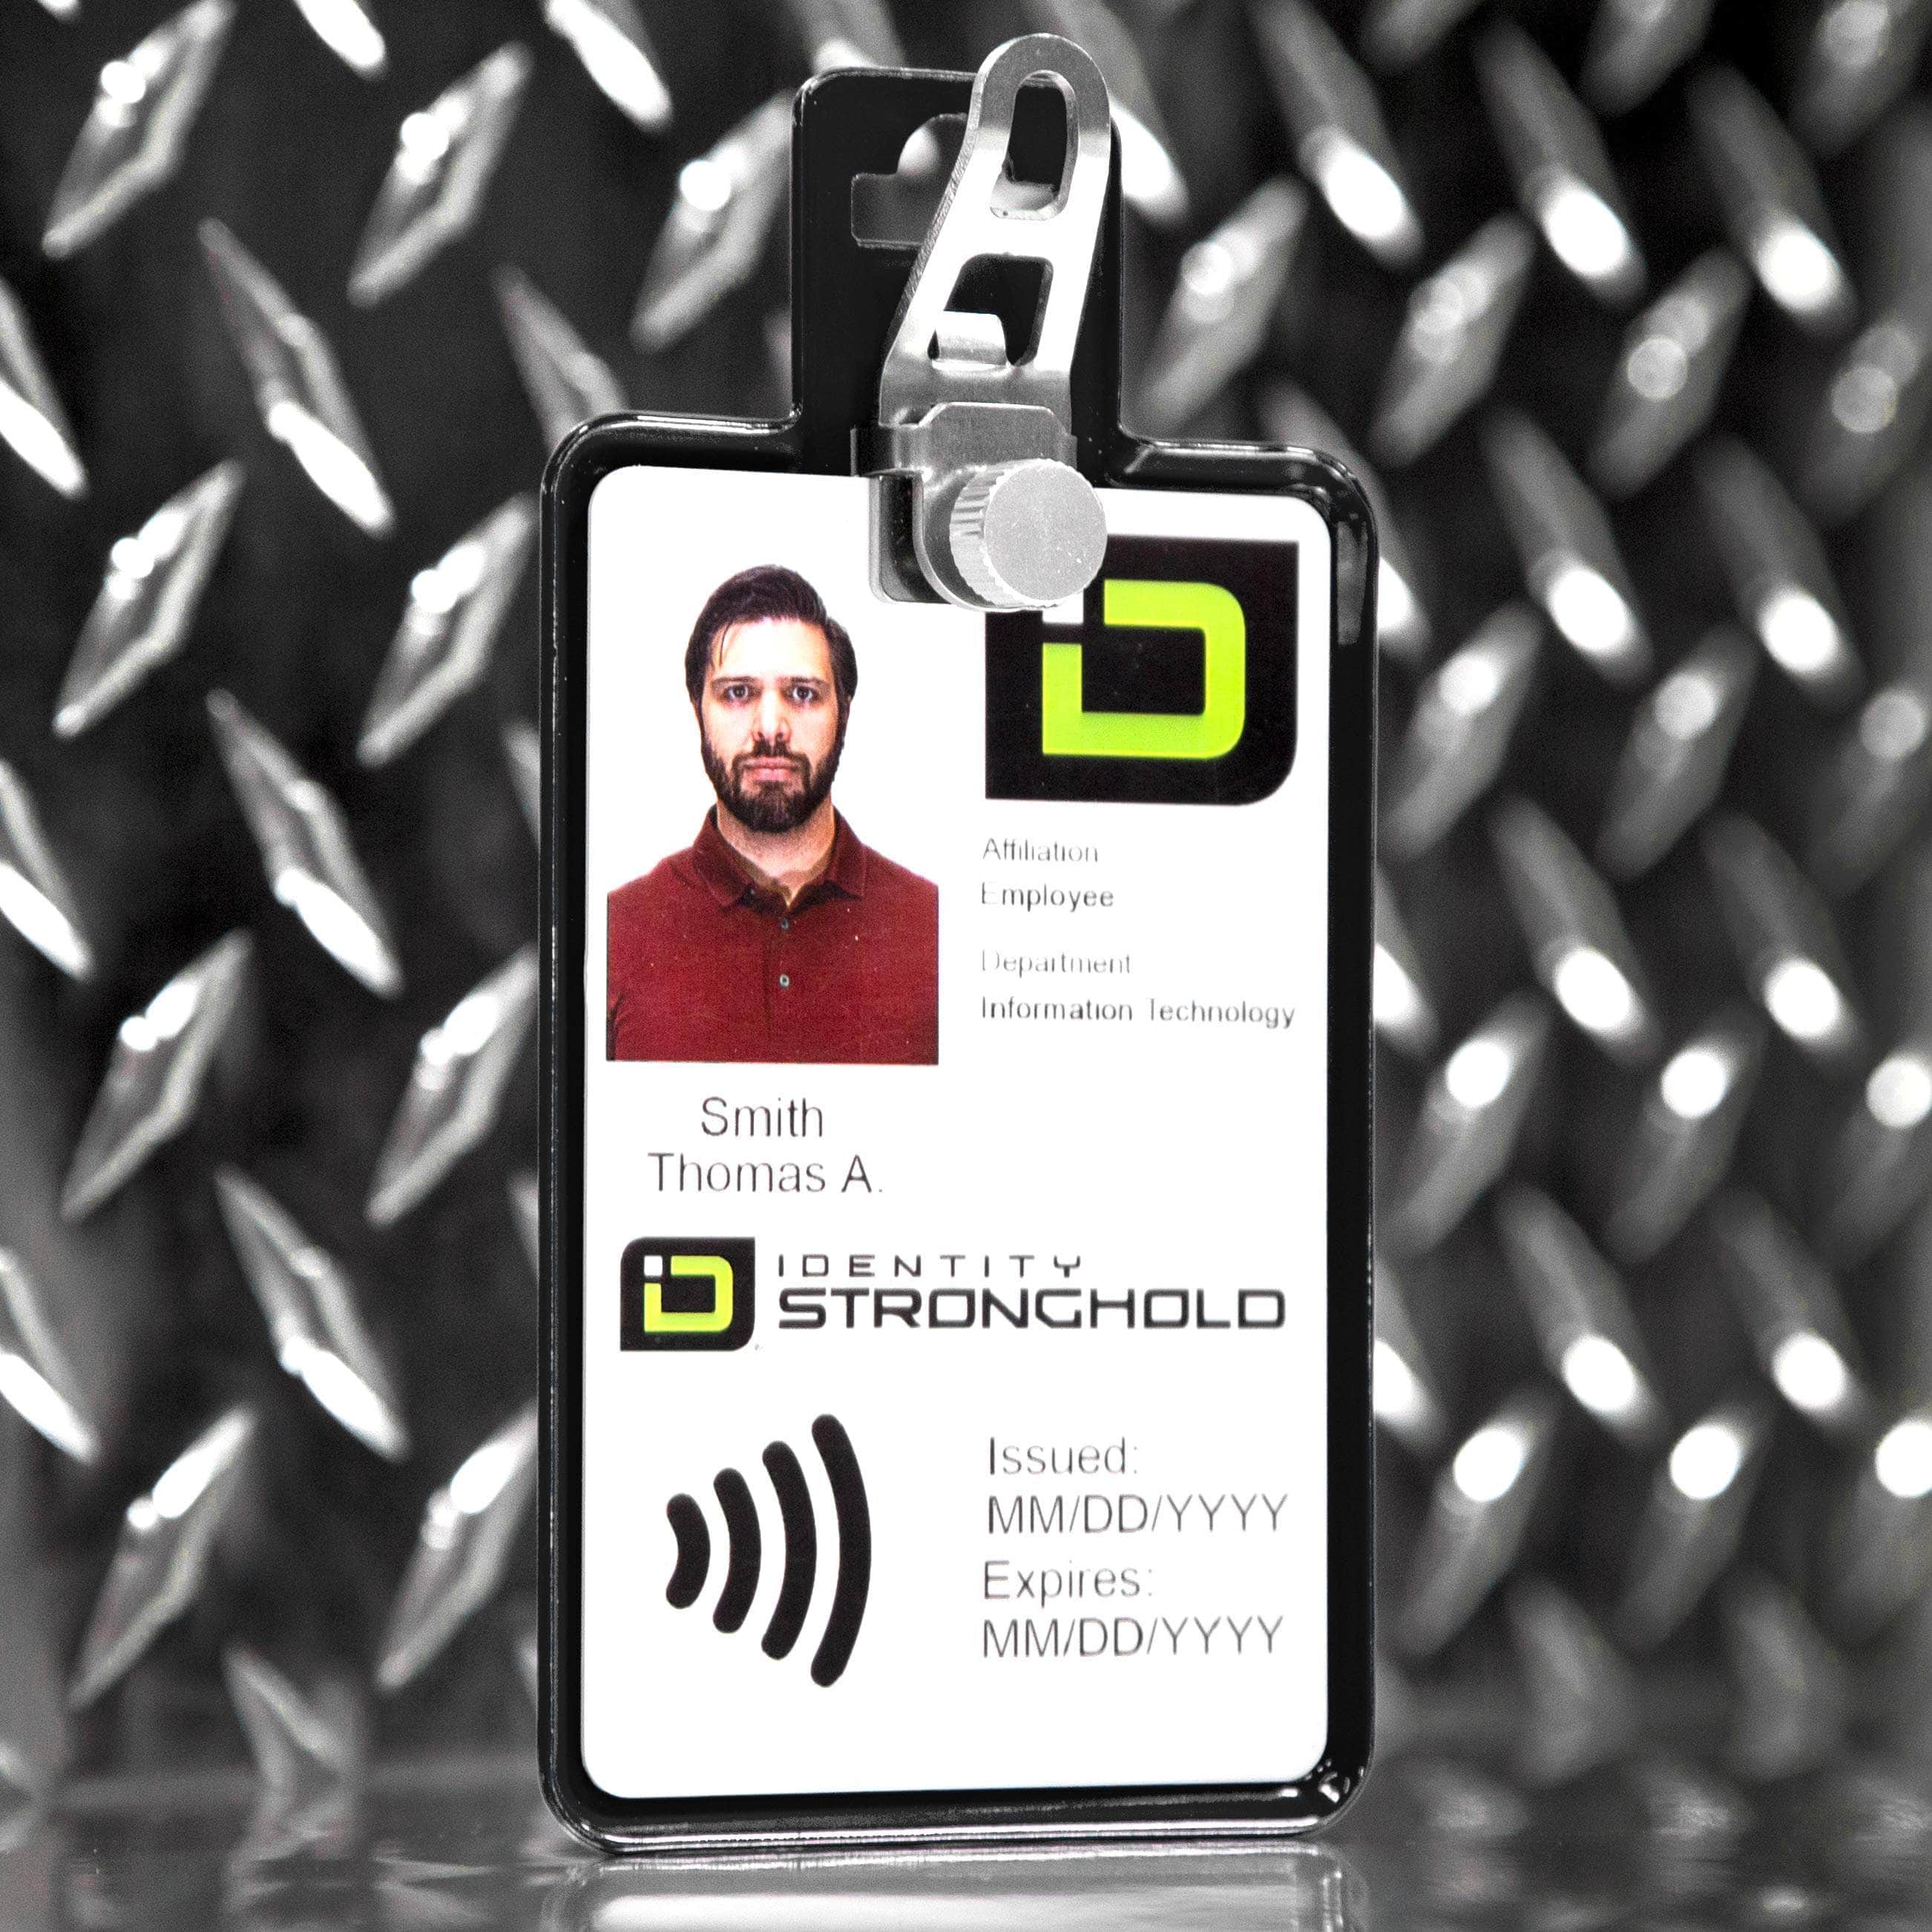 ID Stronghold Badgeholder BloxProx NEW - Magnetic Badge Holder - RFID Secure Badge Holder Genesis™ with BloxProx™